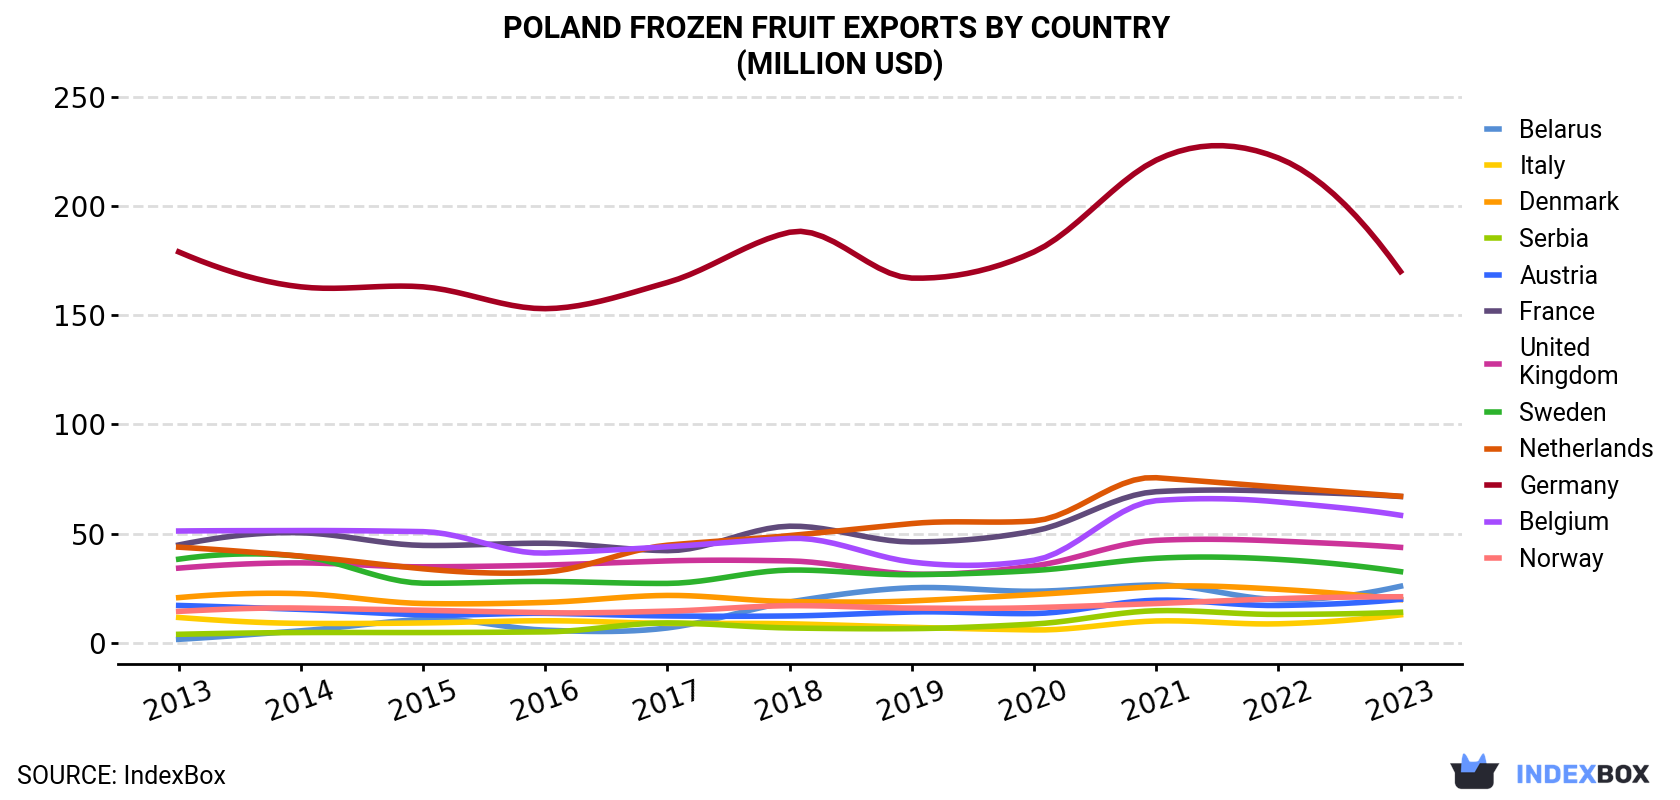 Poland Frozen Fruit Exports By Country (Million USD)